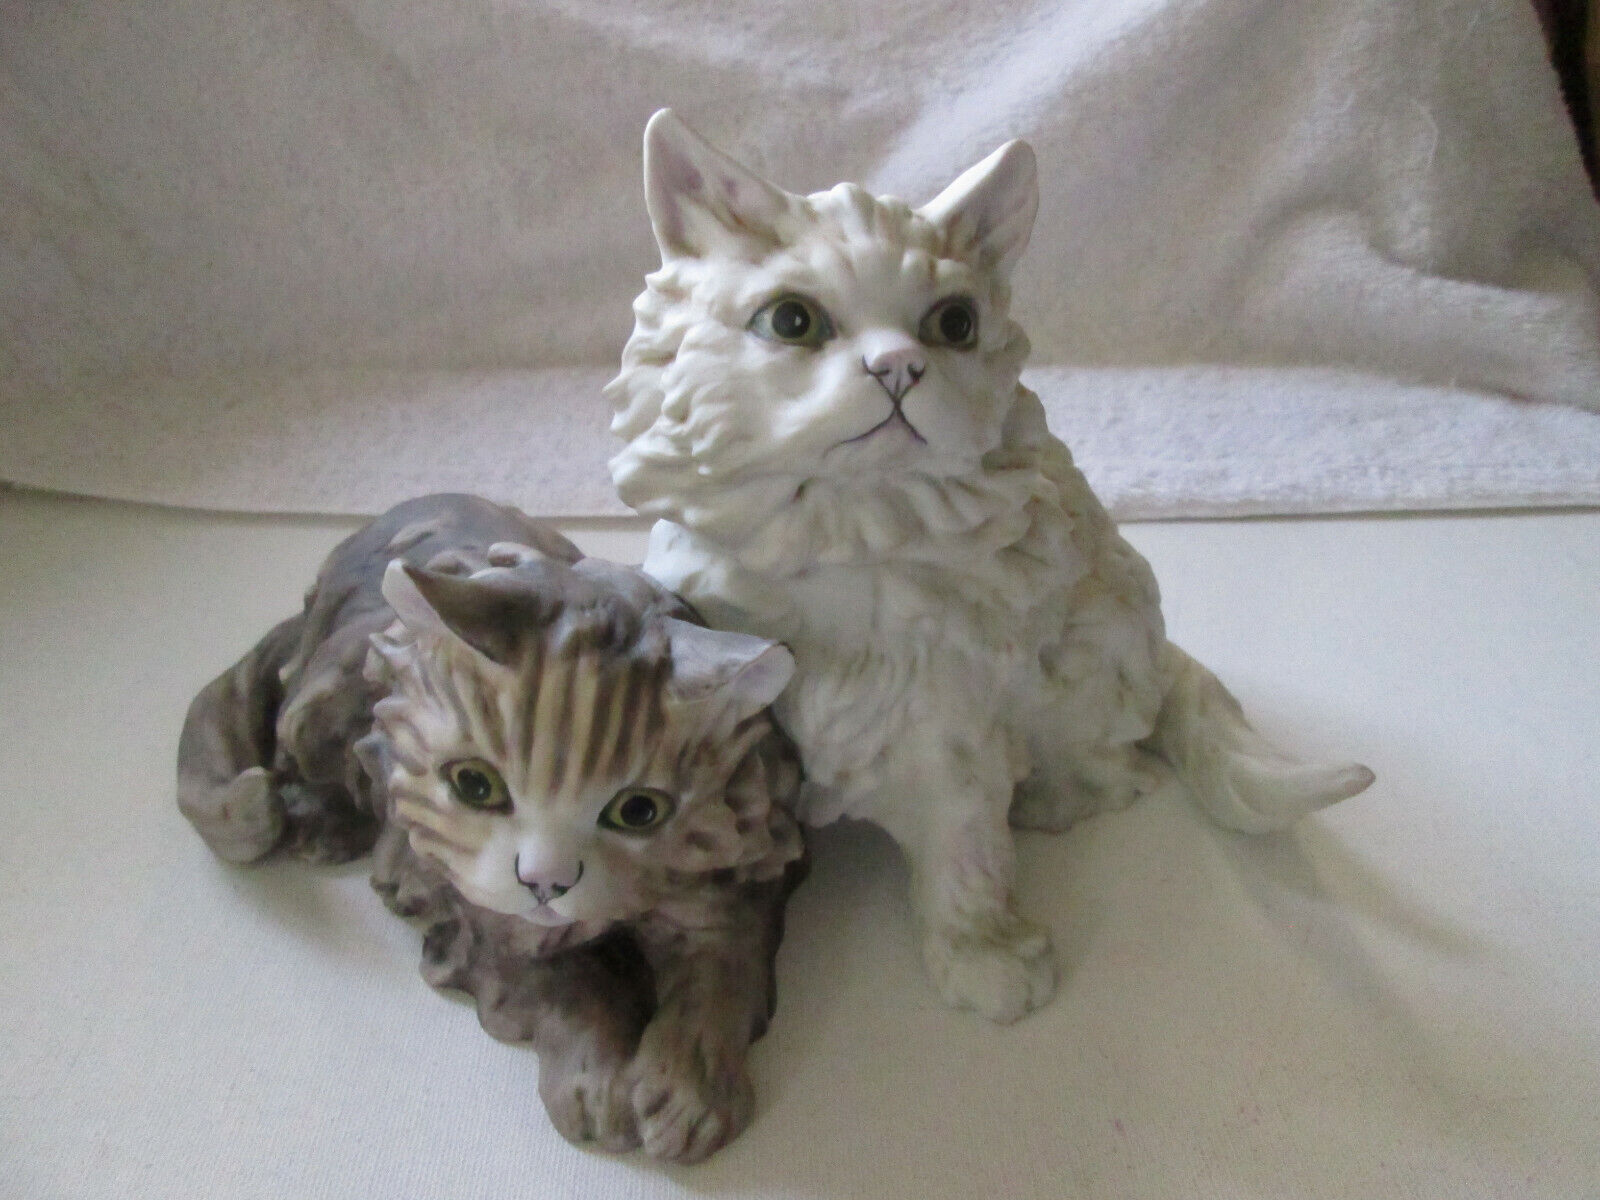 Kaiser Porcelain Figurine Two cats Hand Painted by GAWANTKA 490